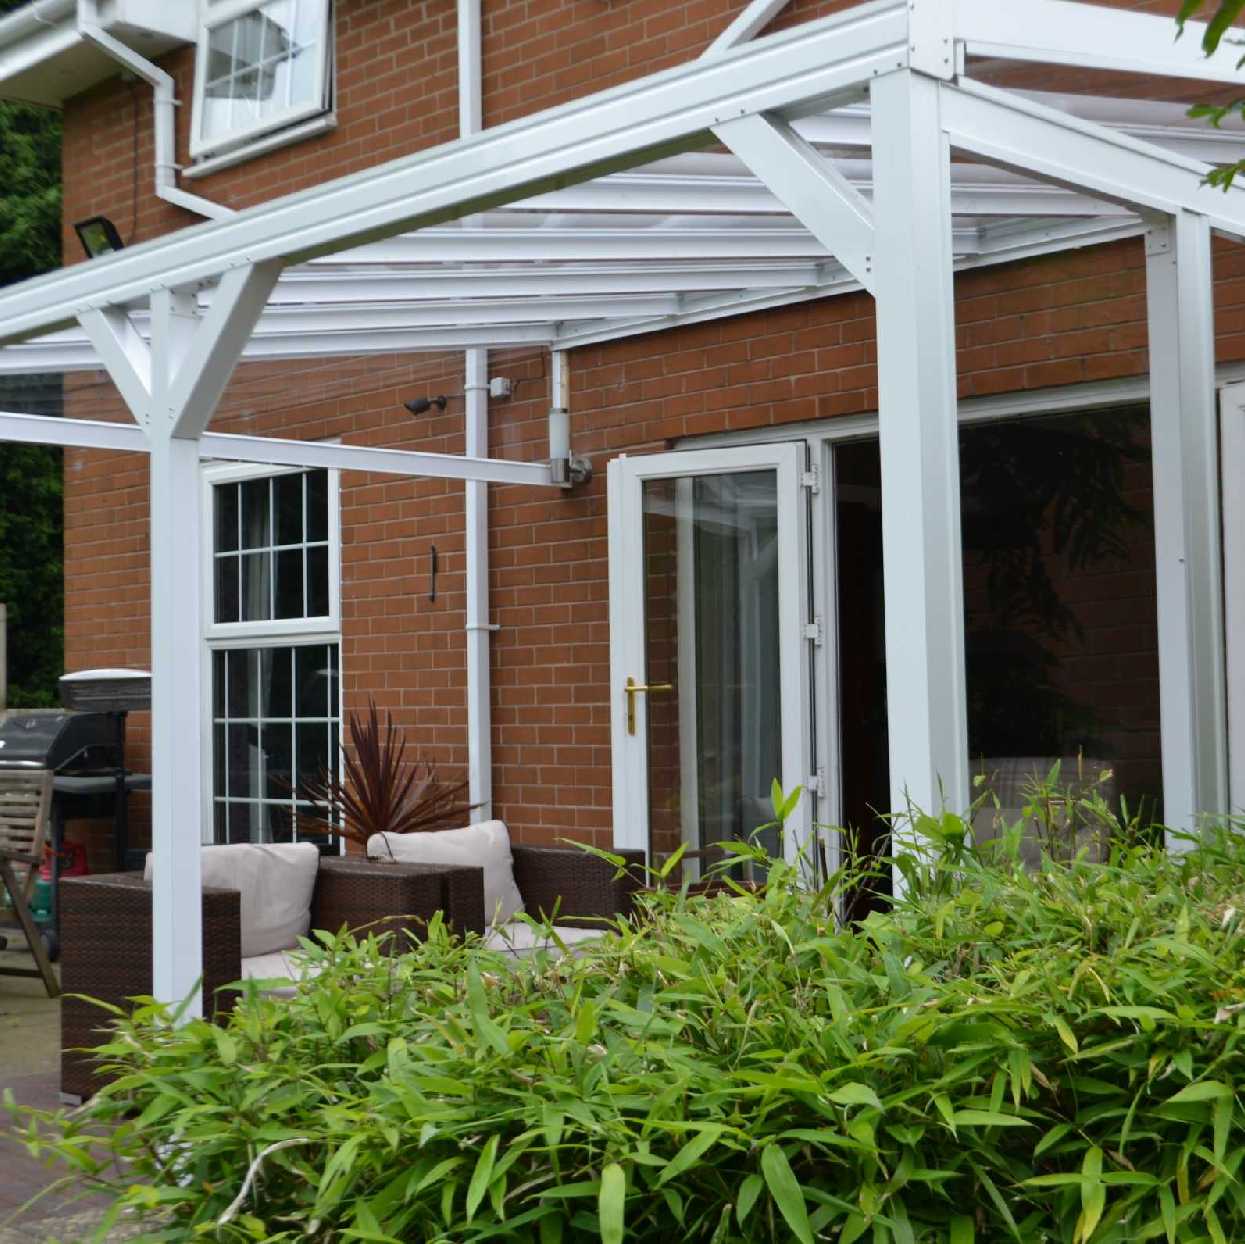 Omega Smart Lean-To Canopy, White with 6mm Glass Clear Plate Polycarbonate Glazing - 3.1m (W) x 4.0m (P), (2) Supporting Posts from Omega Build